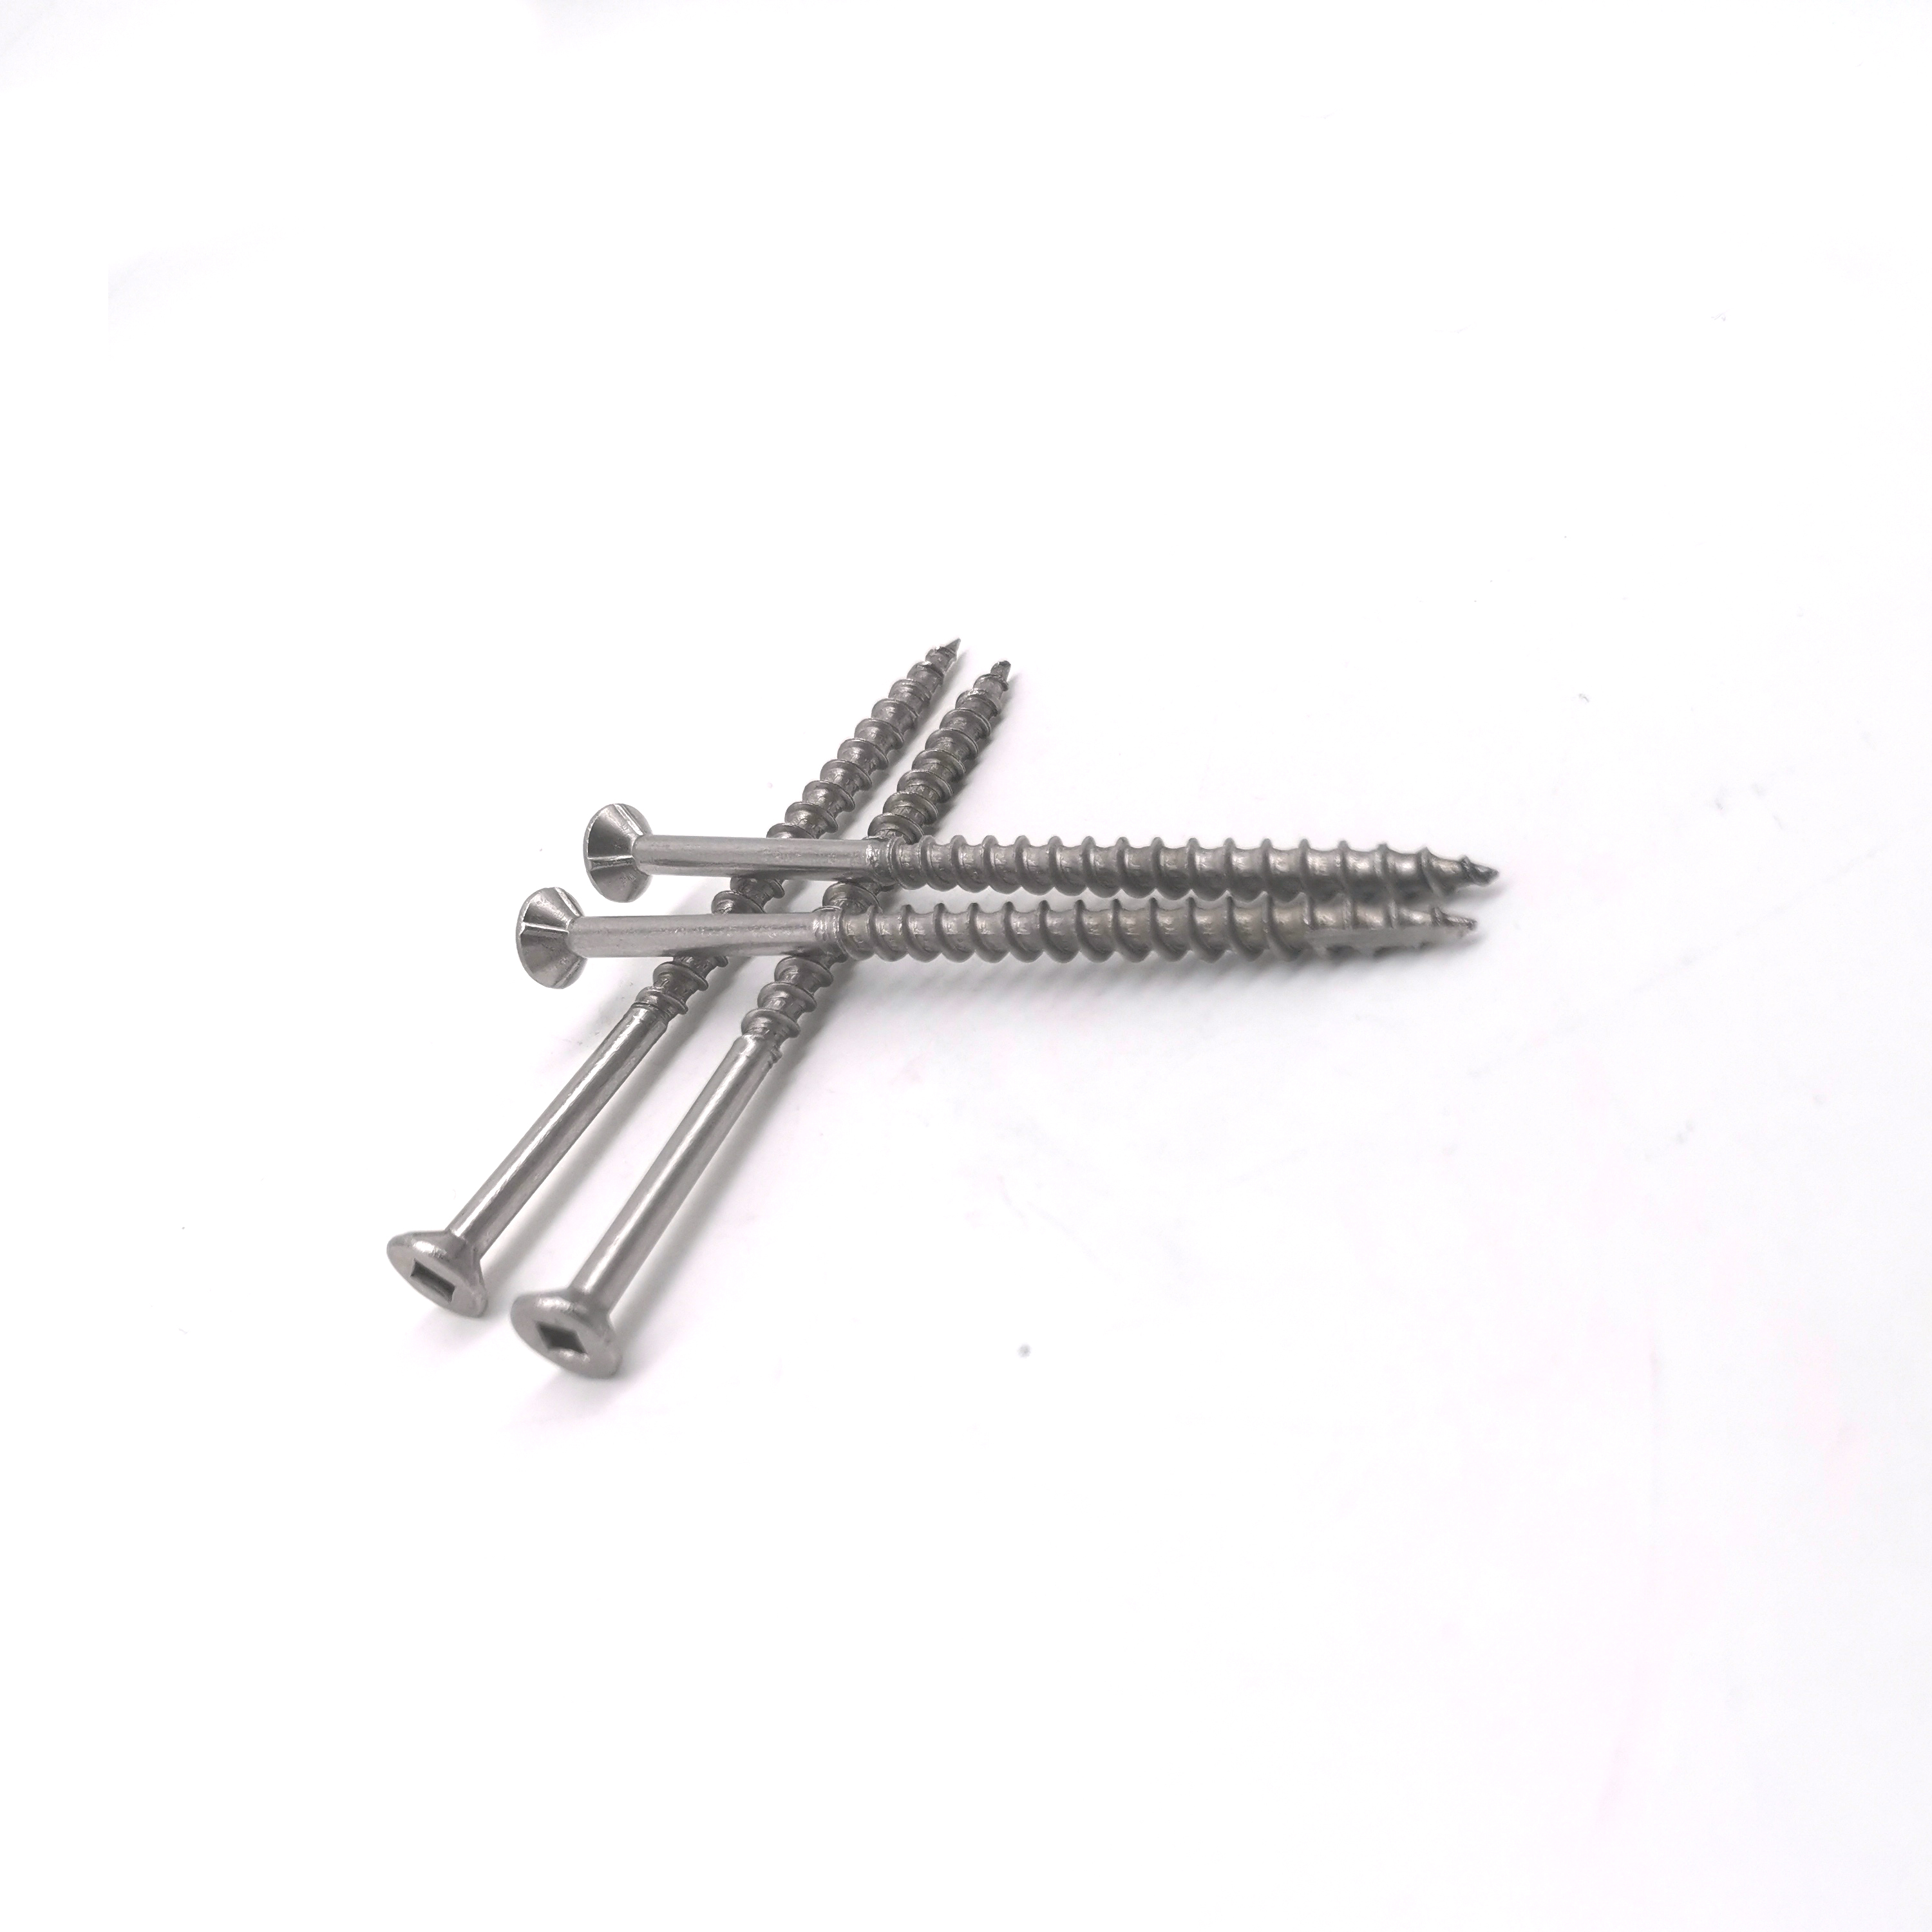 Stainless Steel Lag Bolts SS Grub Set Industry 80mm Cross Cross Countersunk Head Self Tapping Screw